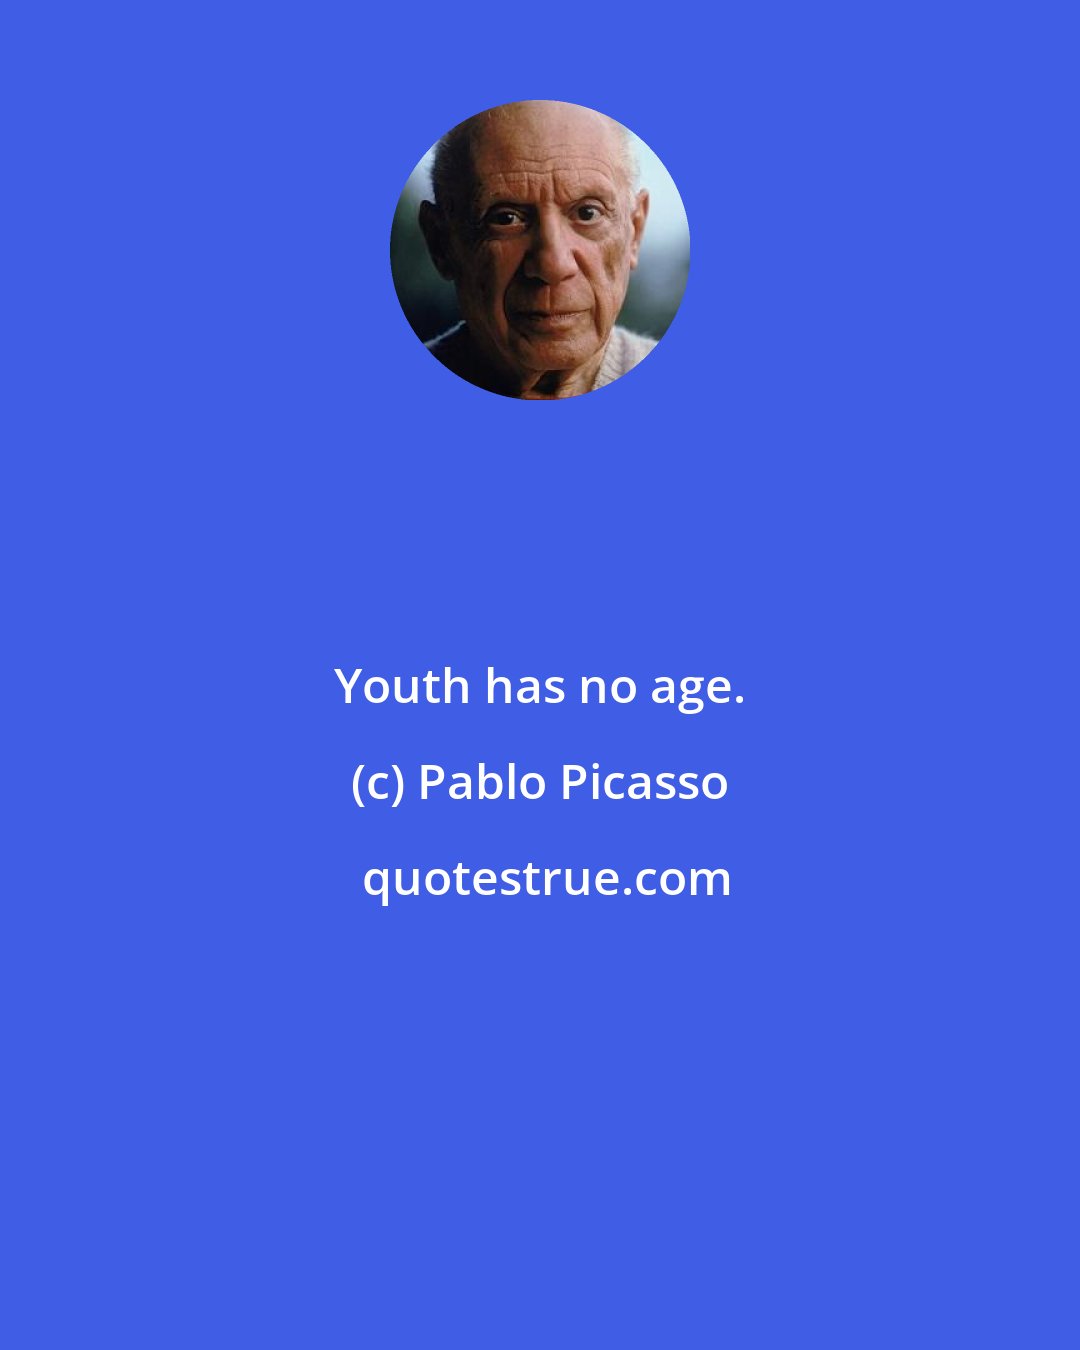 Pablo Picasso: Youth has no age.